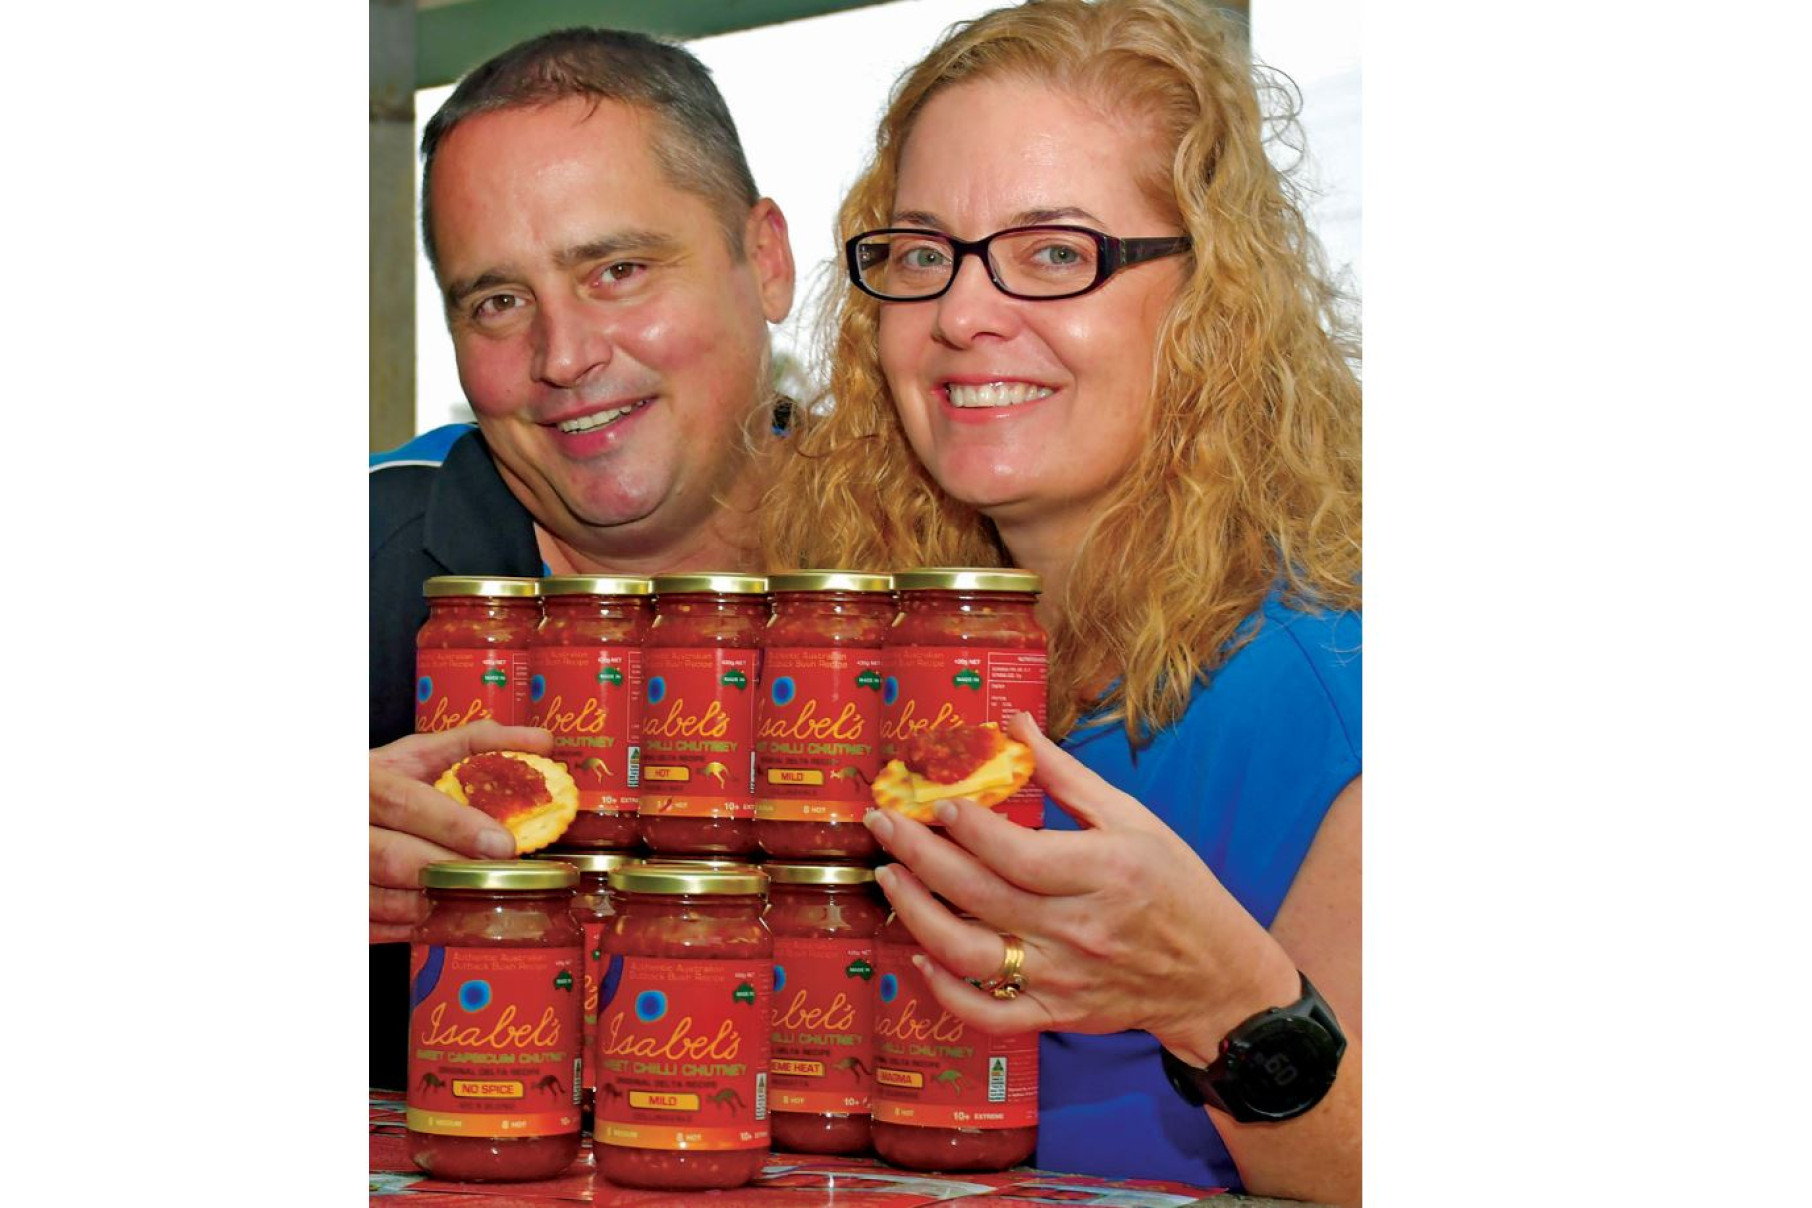 Local chutney is a winner - feature photo